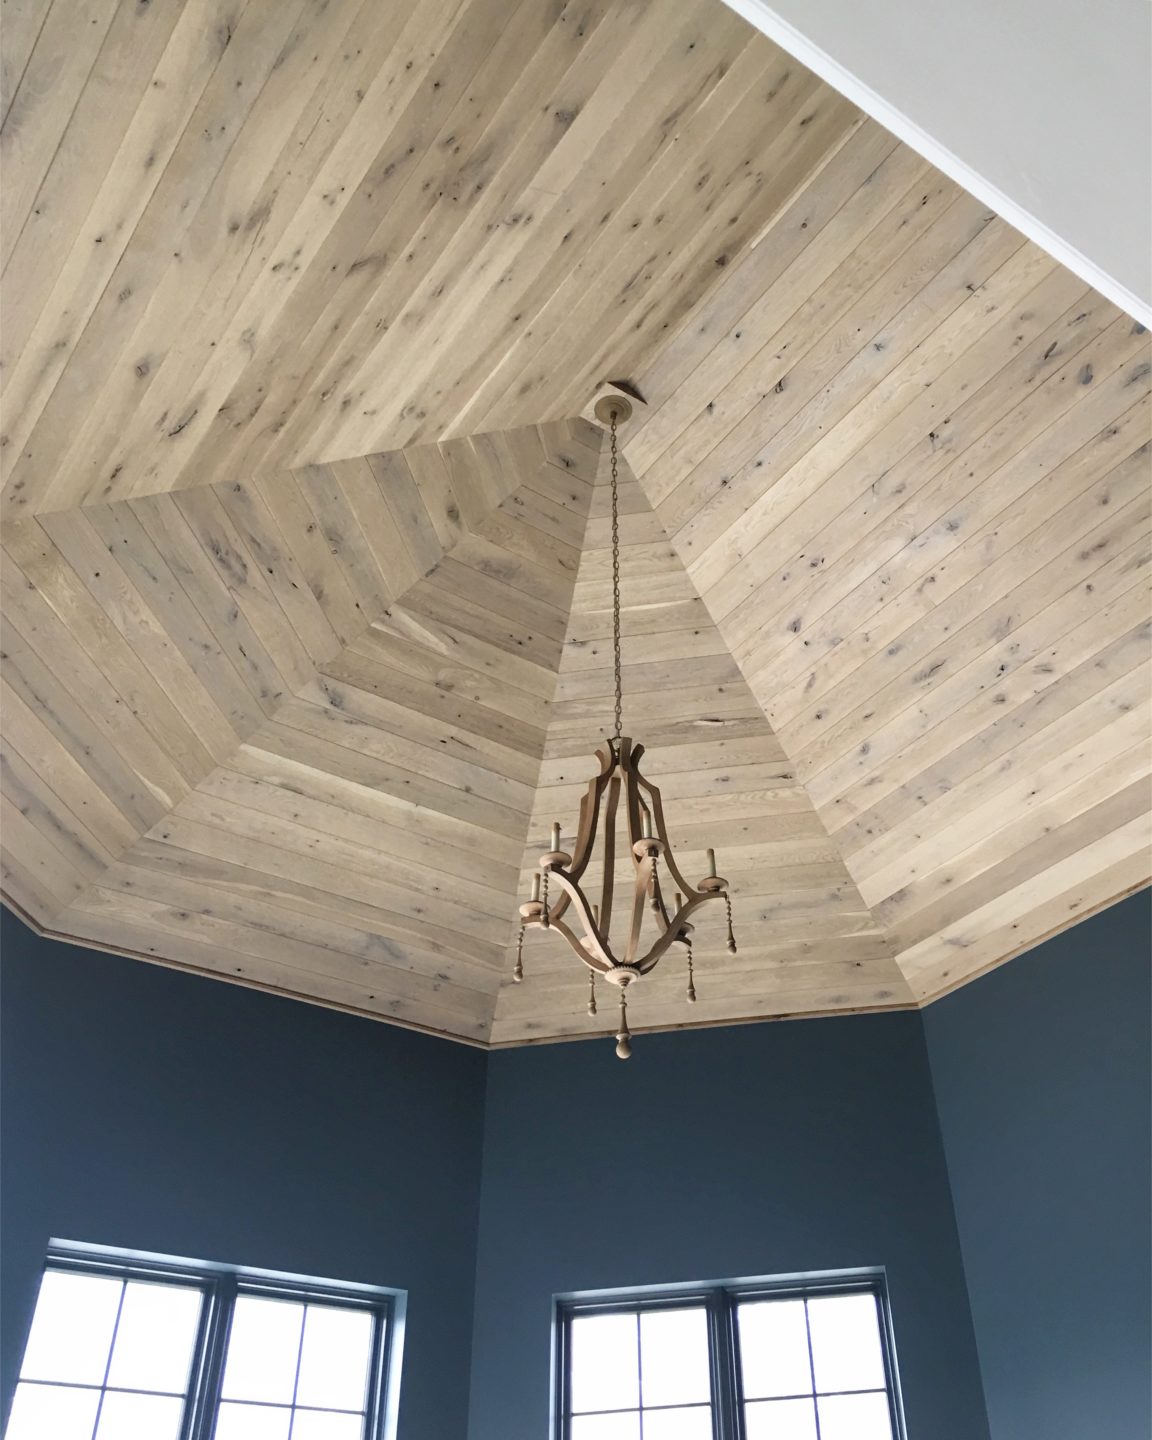 evergreen-portfolio-hinckley-french-country-estate-interior-detail-ceiling-wood-paneling